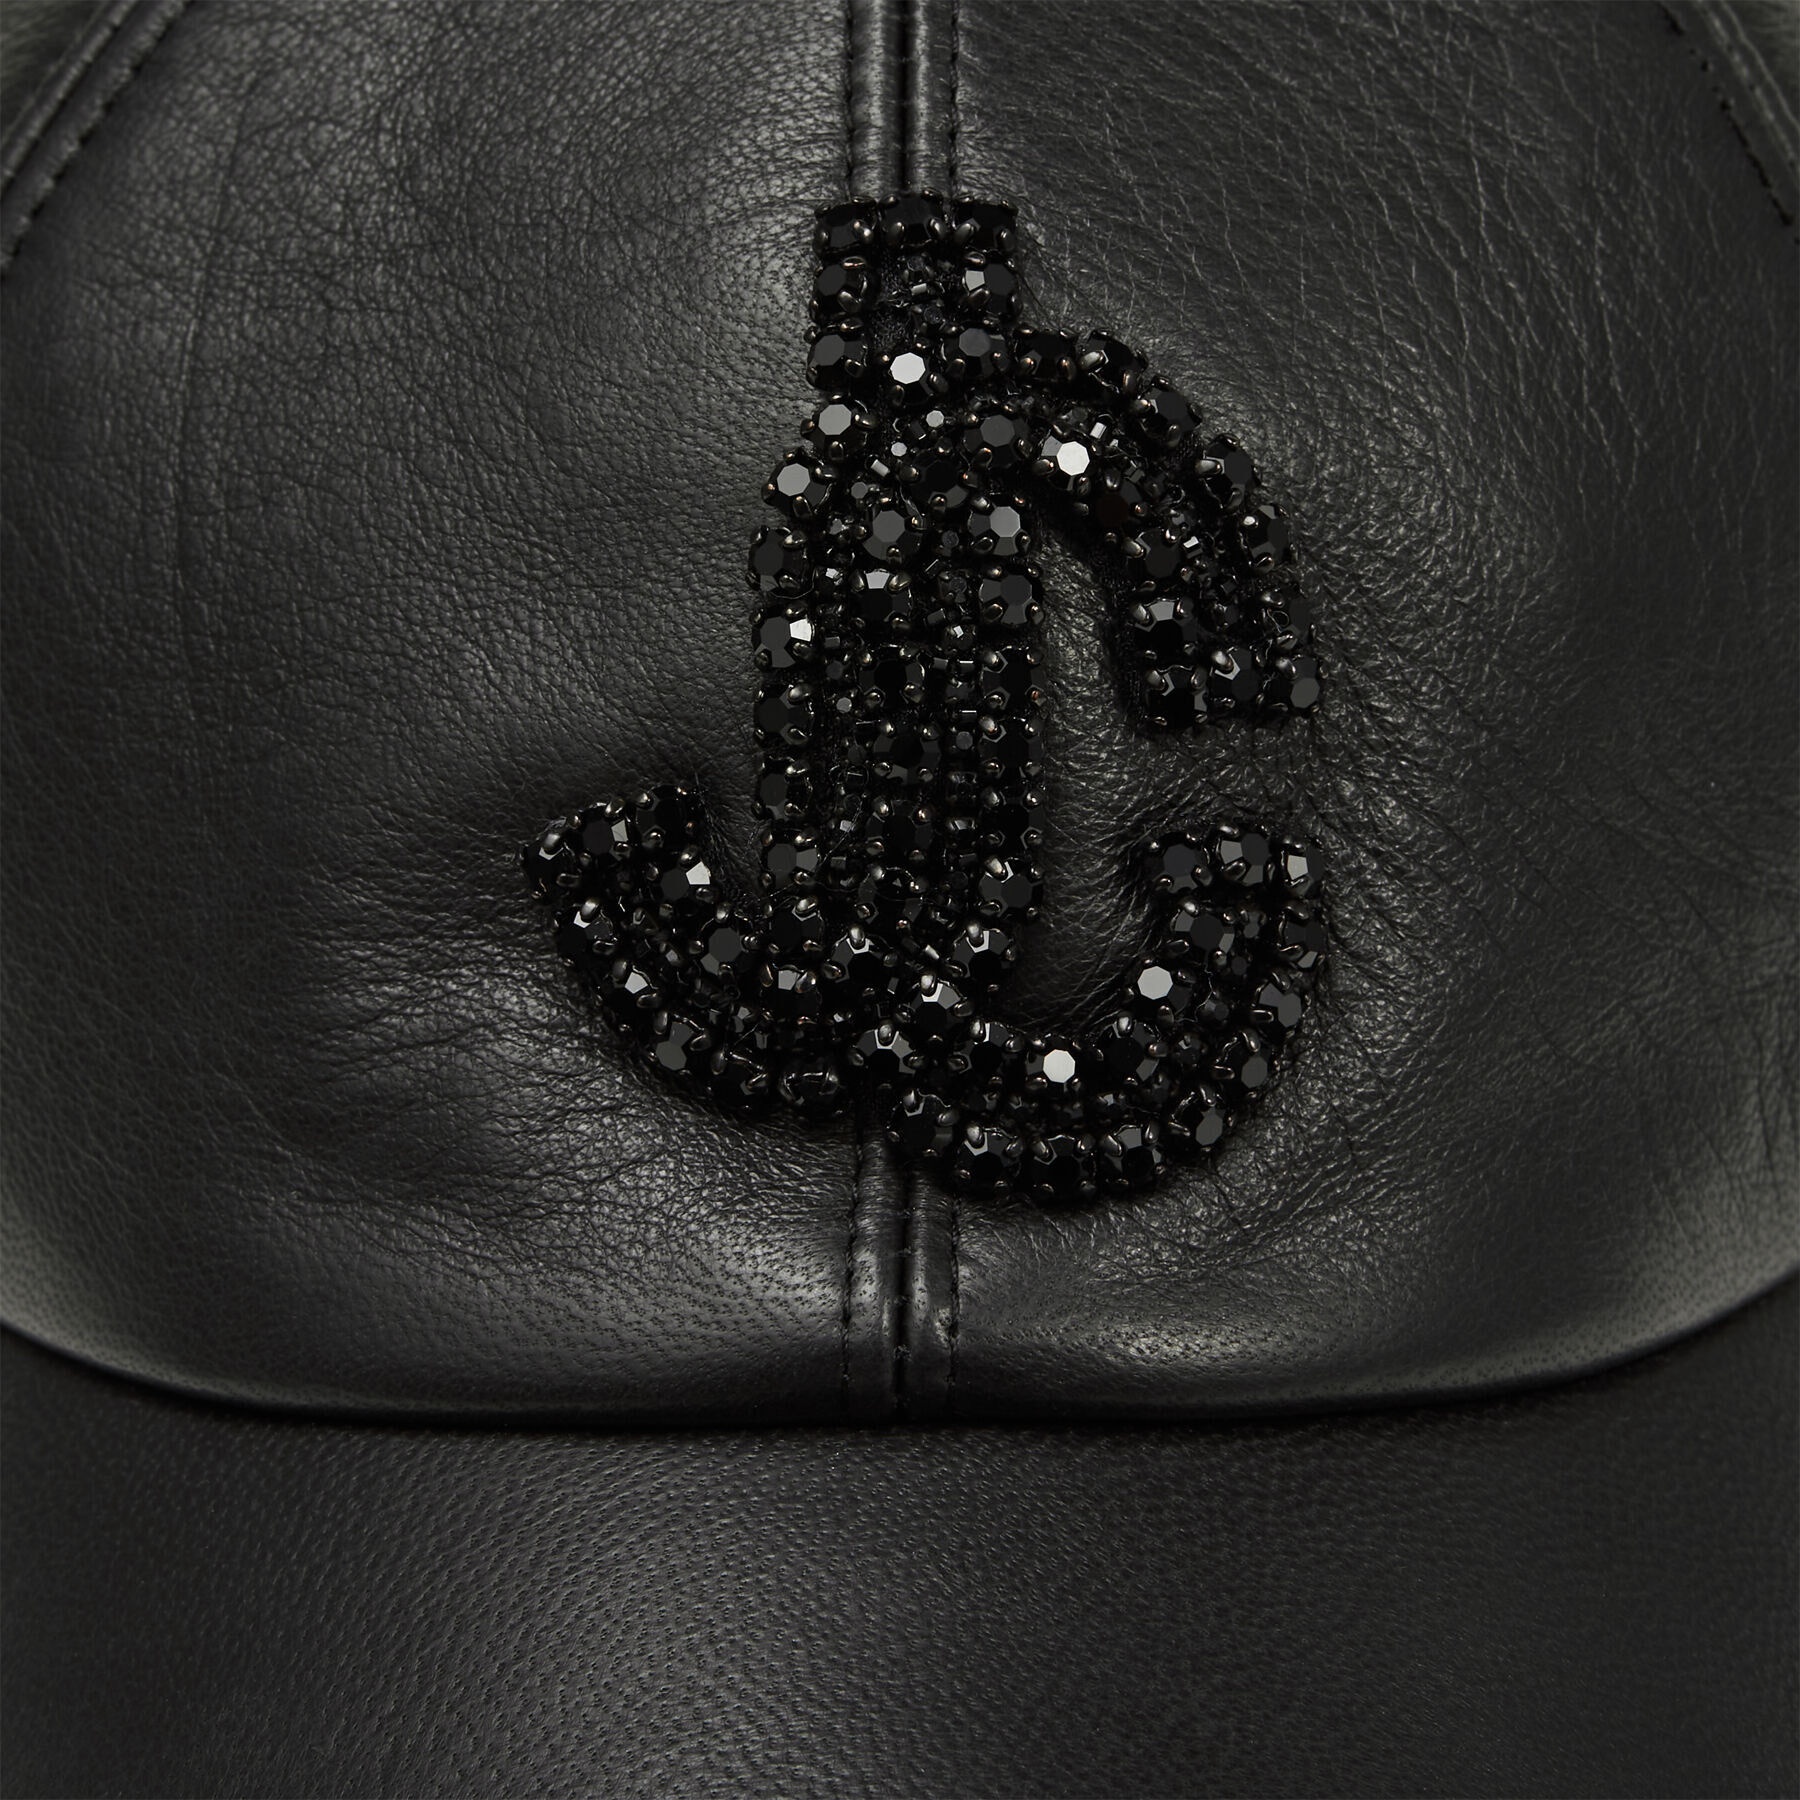 Saby
Black Leather Baseball Cap with Crystal JC Logo - 4